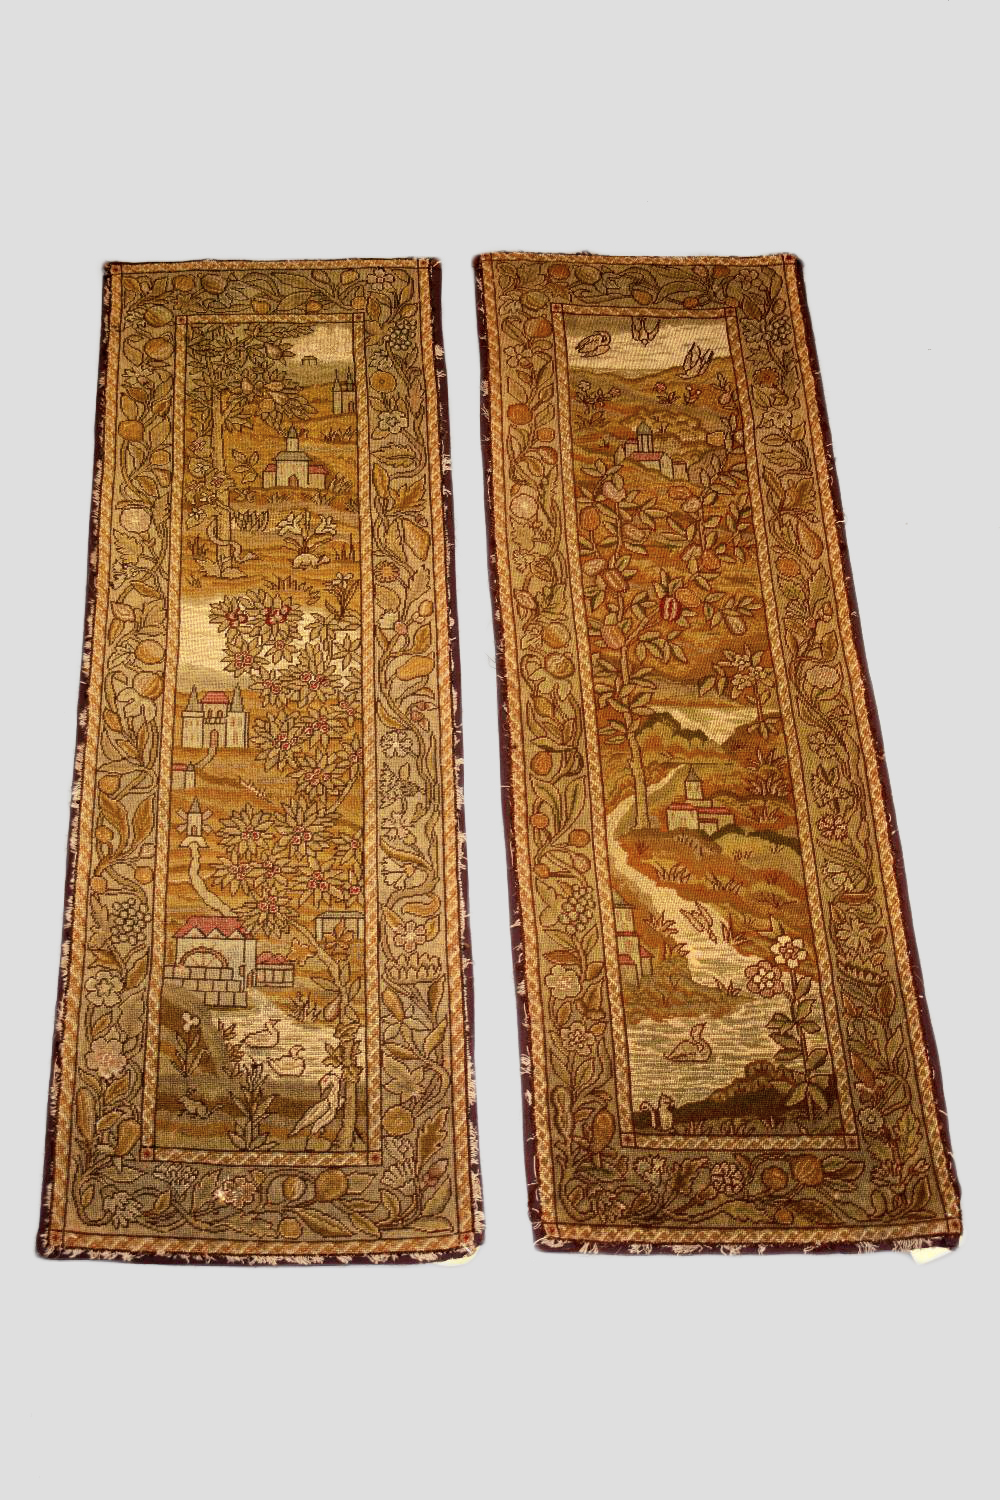 Pair of English needlework hangings, early 19th century, each 60in. X 19in. 152cm. X 48cm. Worked in